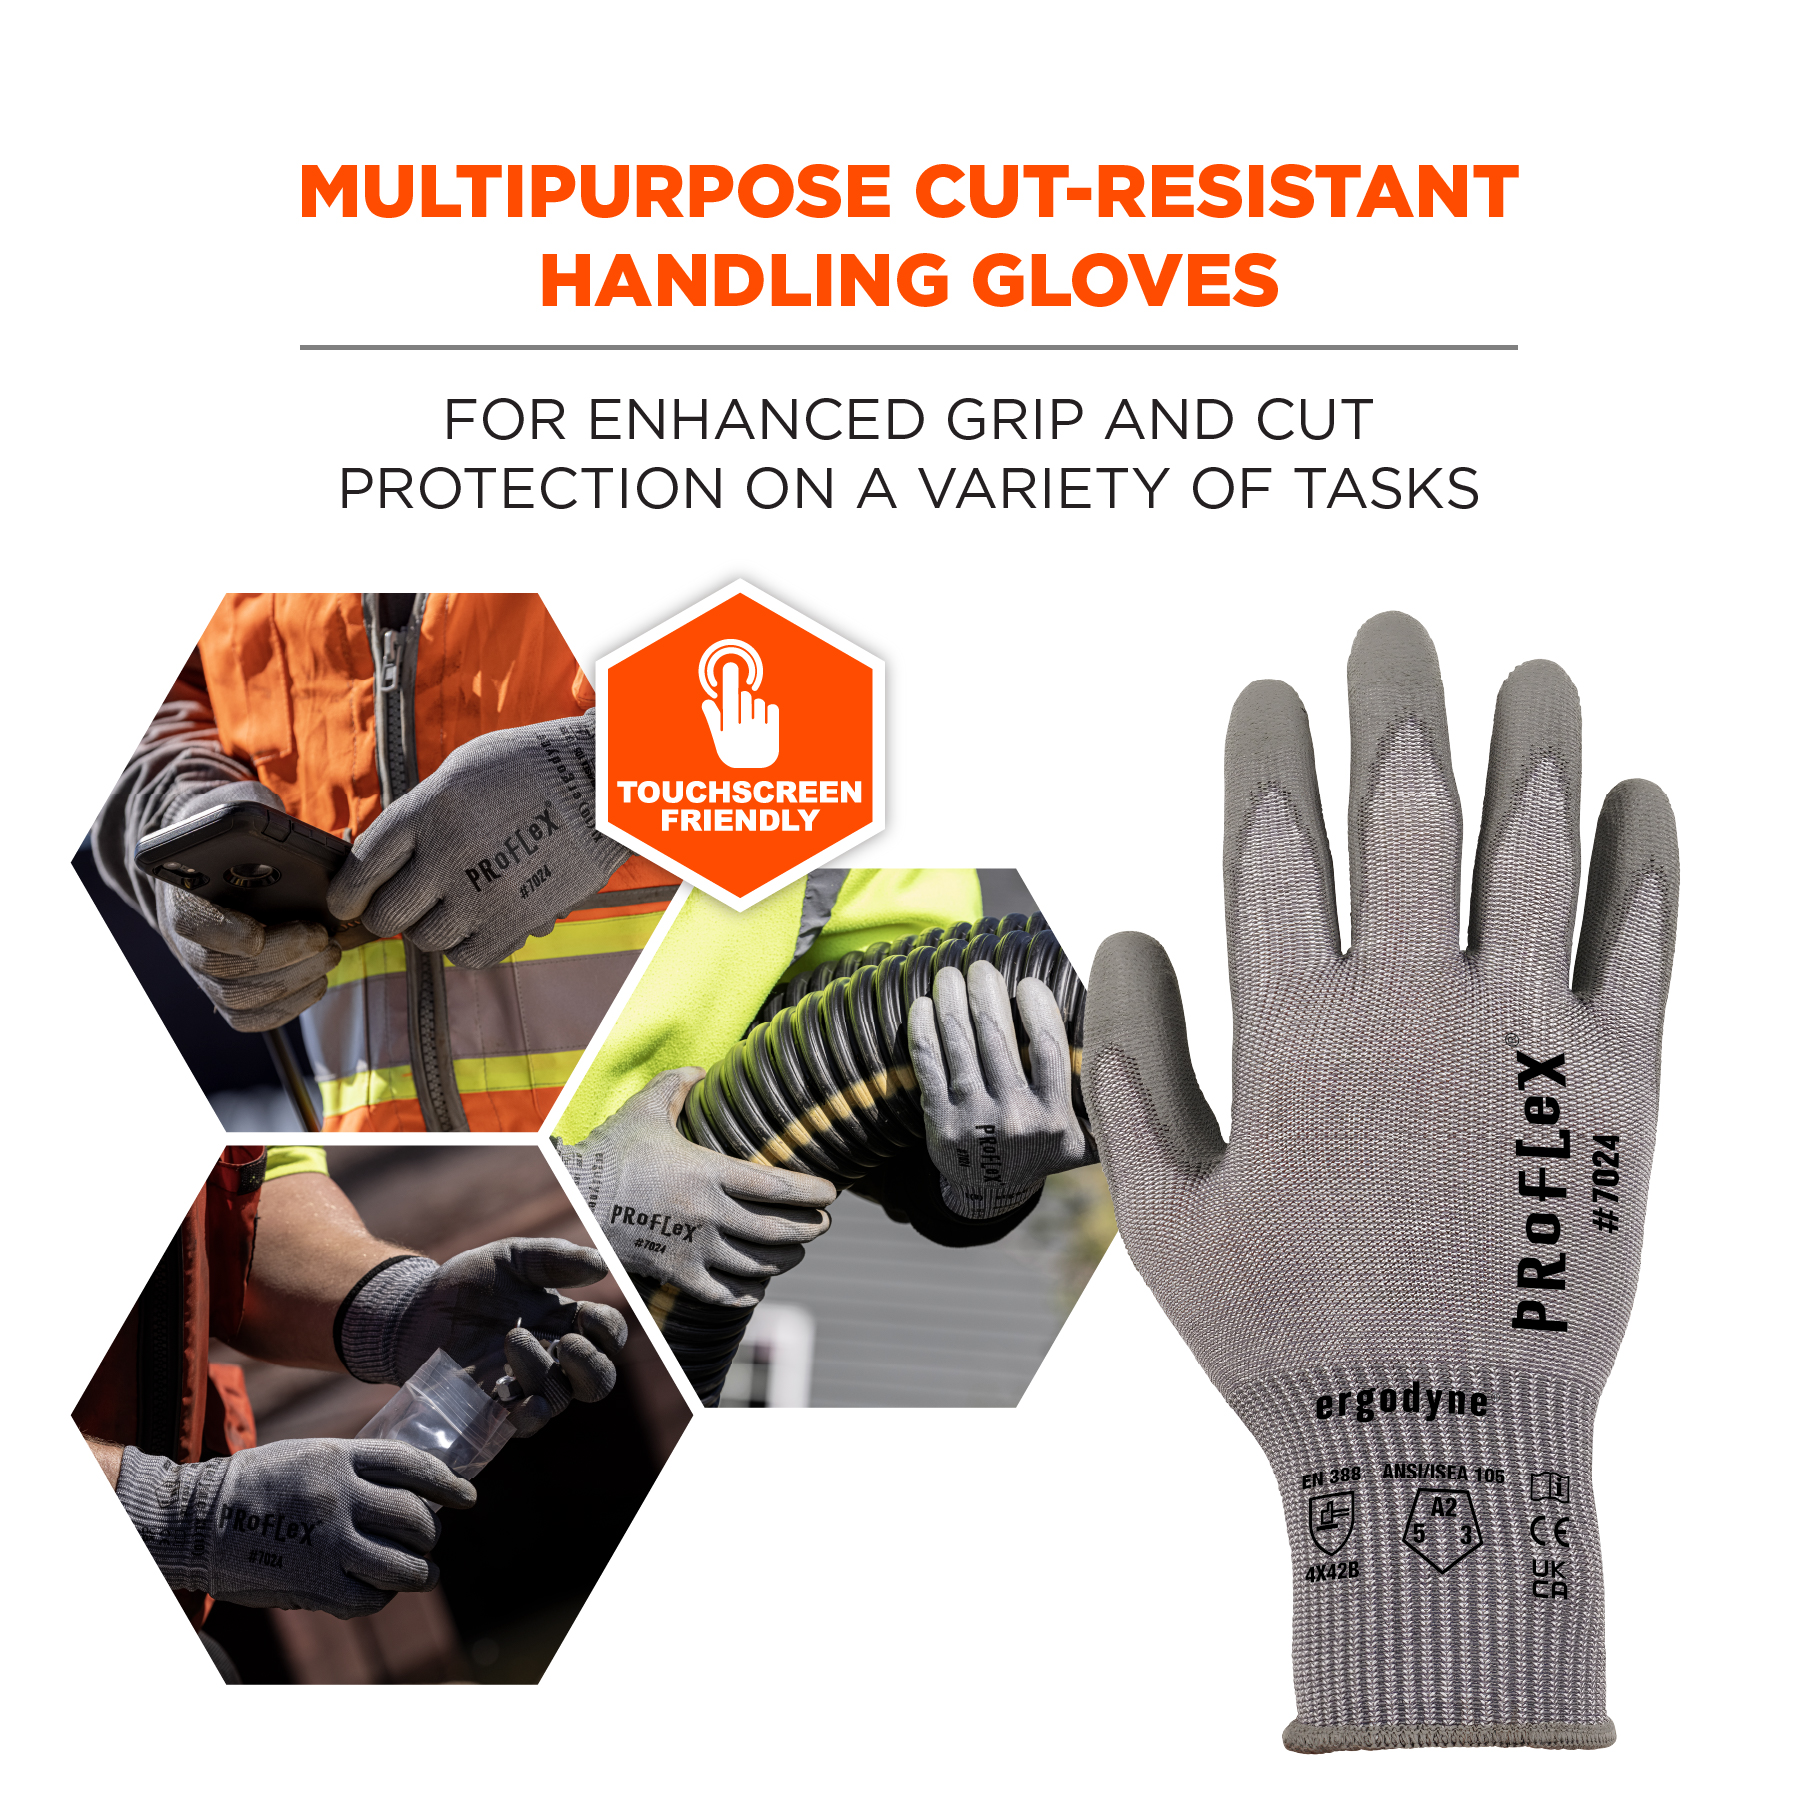 POLYURETHANE COATED GLOVES Work Safety Oil Chemical Grip Protect Hands Fingers L 